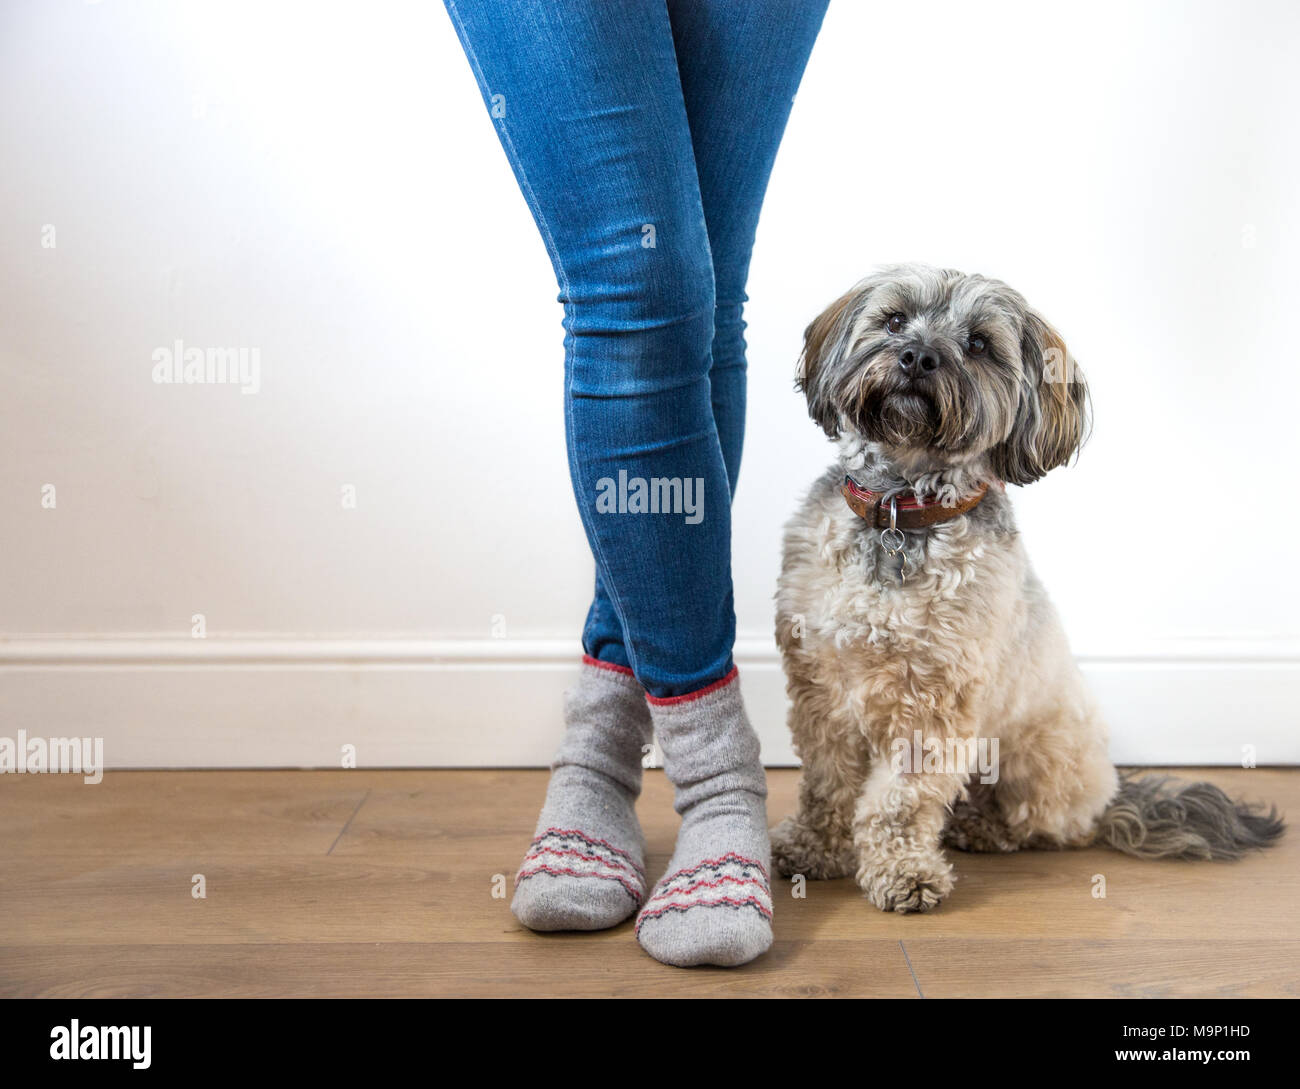 A low angle view of a fashionable young girl in blue denim jeans and cozy socks with her pet dog sitting obediently by her feet indoors. Stock Photo